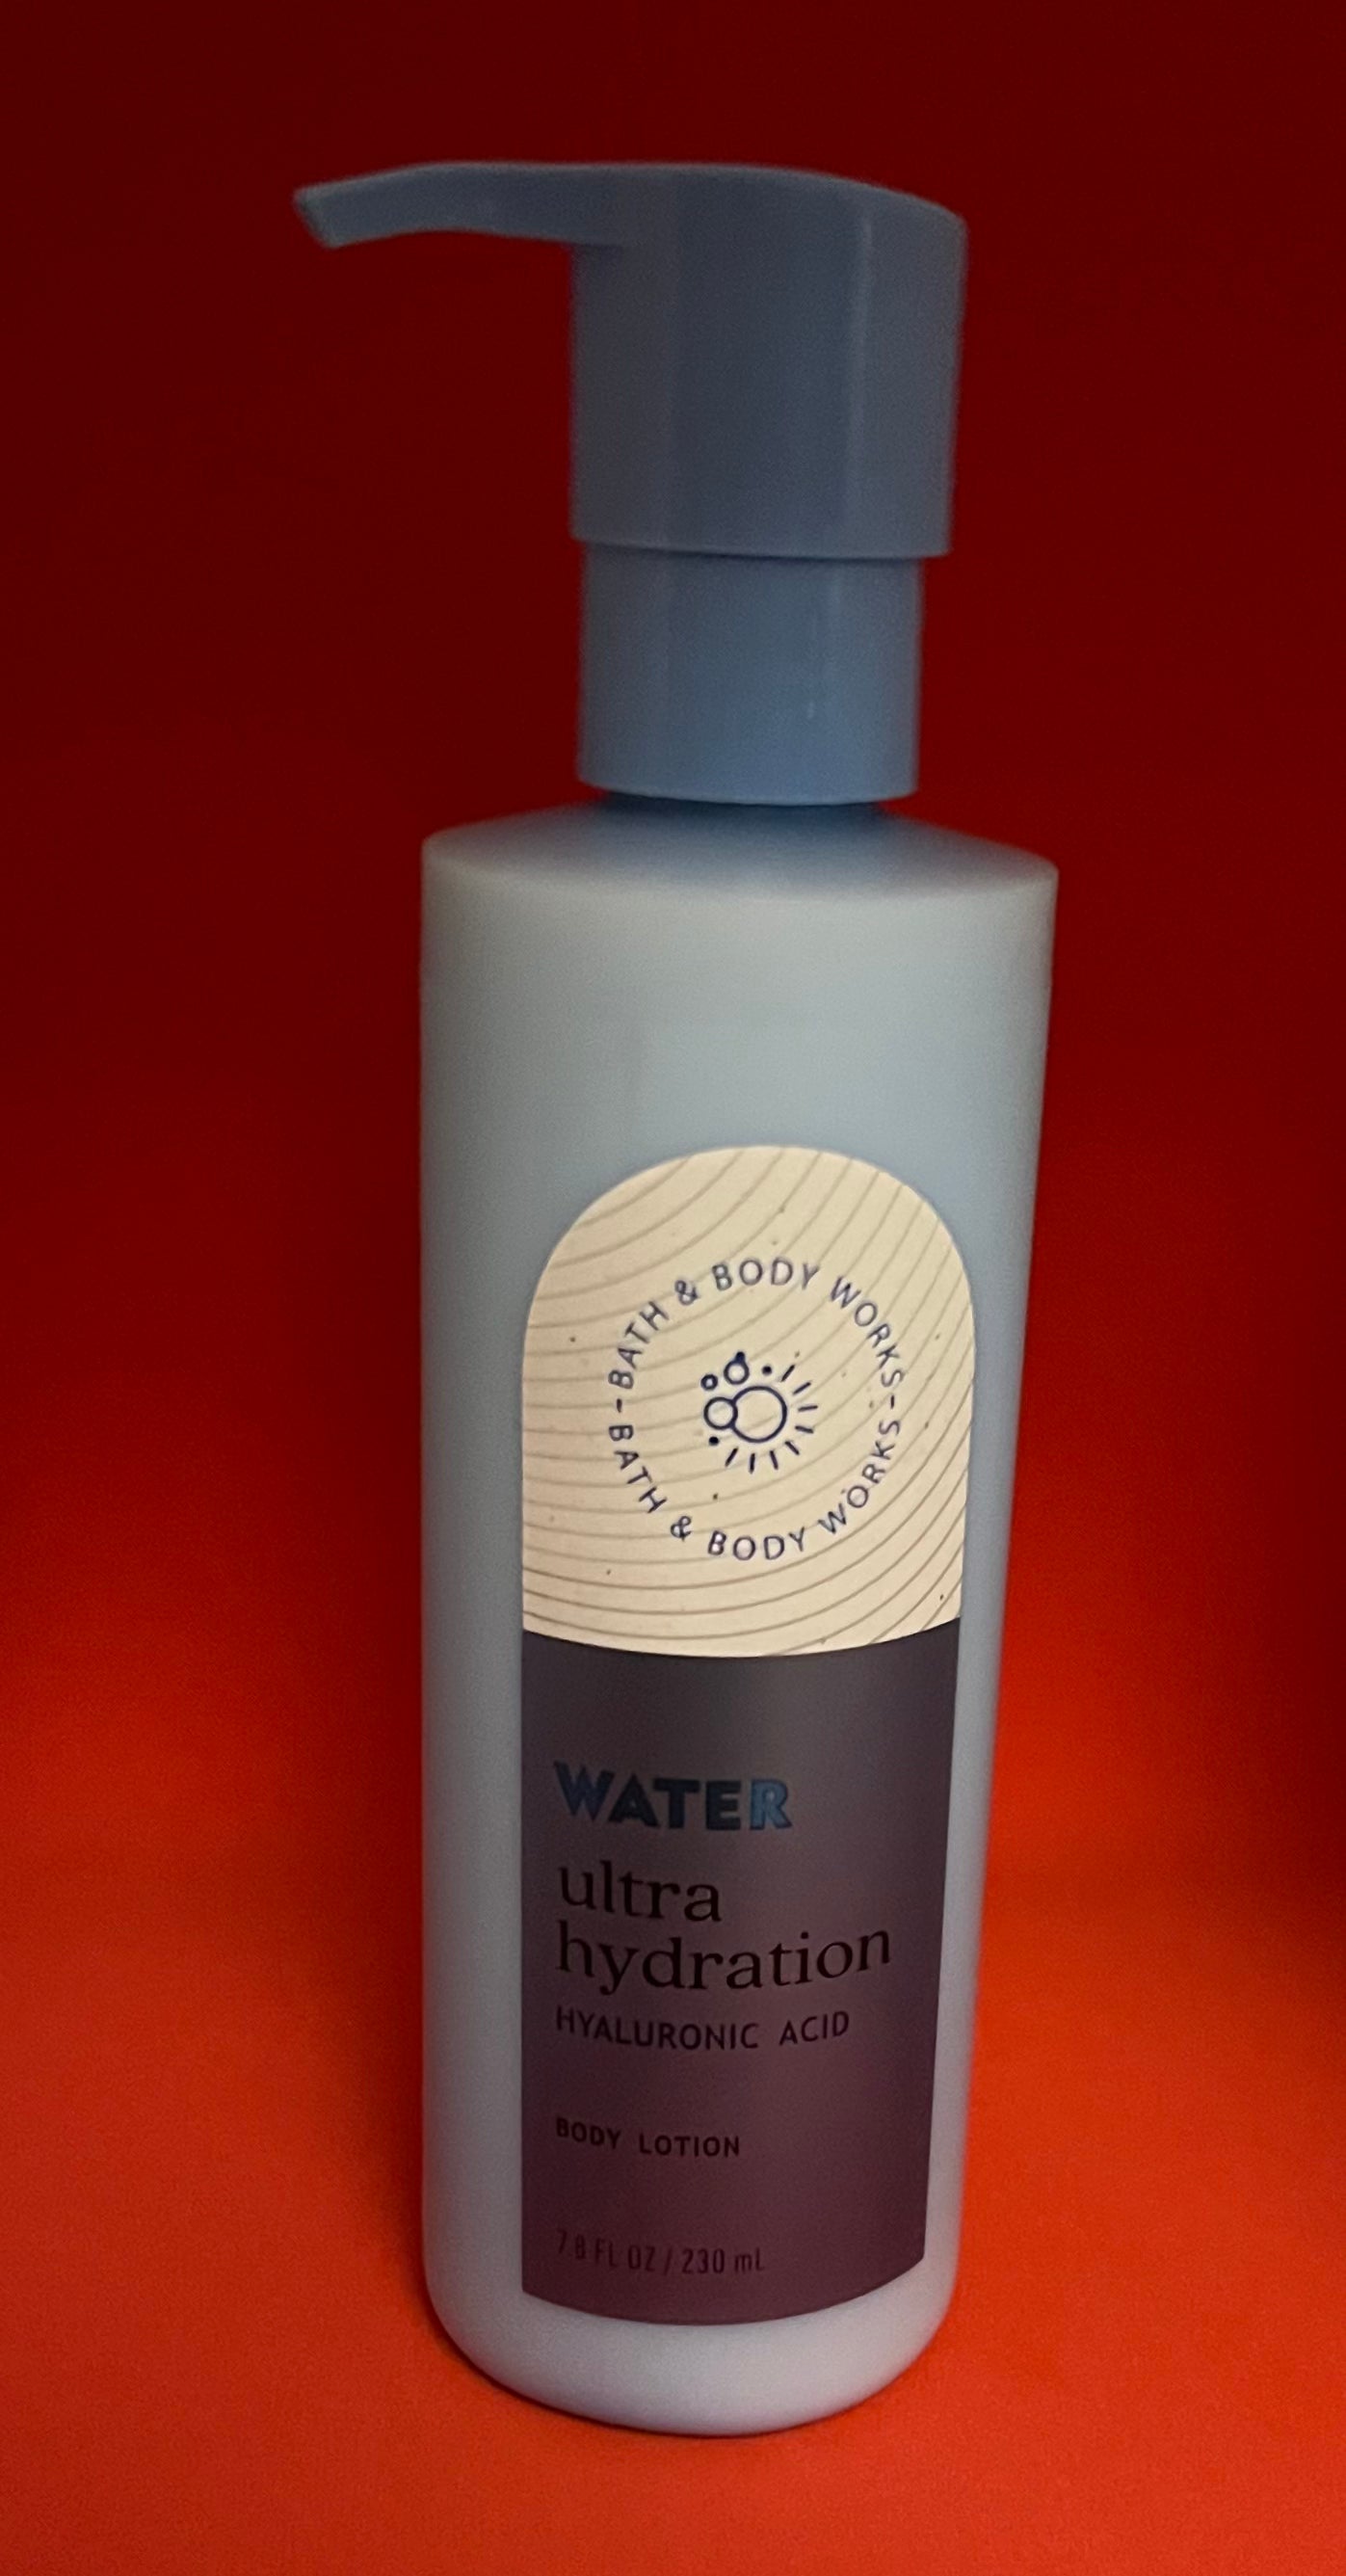 Bath And Body Works Water Ultimate Hydration Hyaluronic Acid Body Lotion